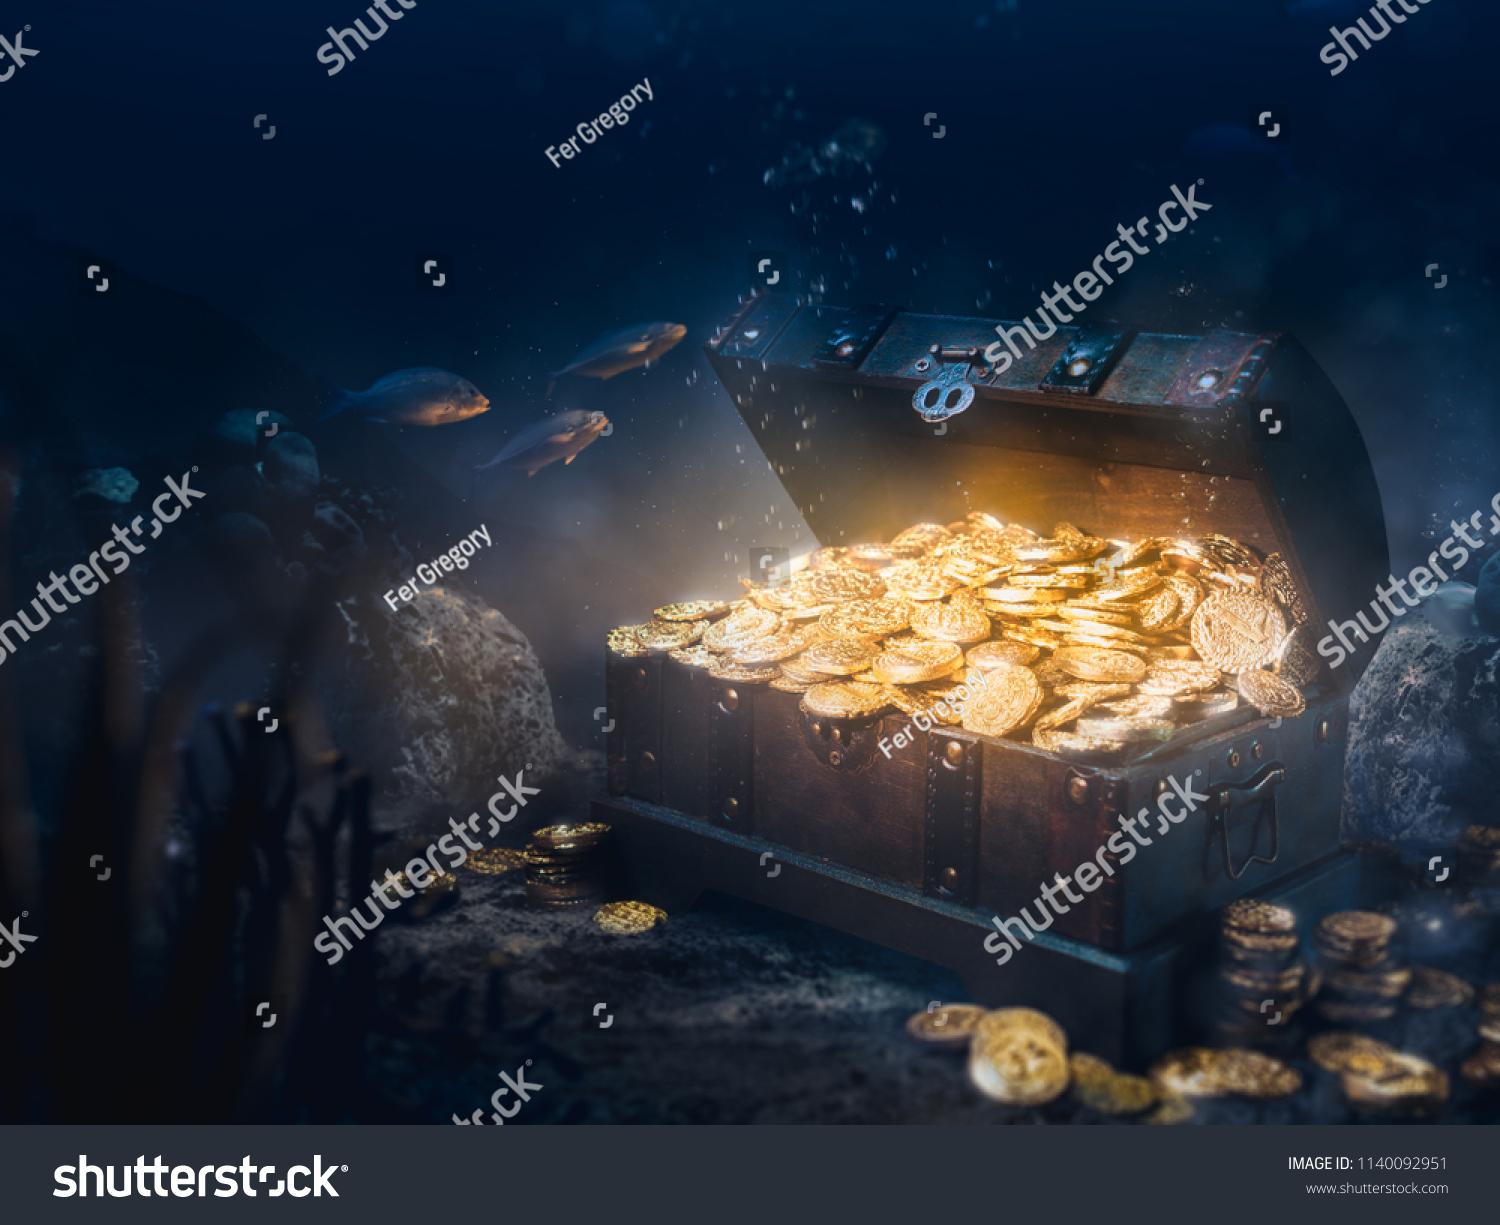 Open treasure chest sunken at the bottom of the sea / high contrast image #1140092951